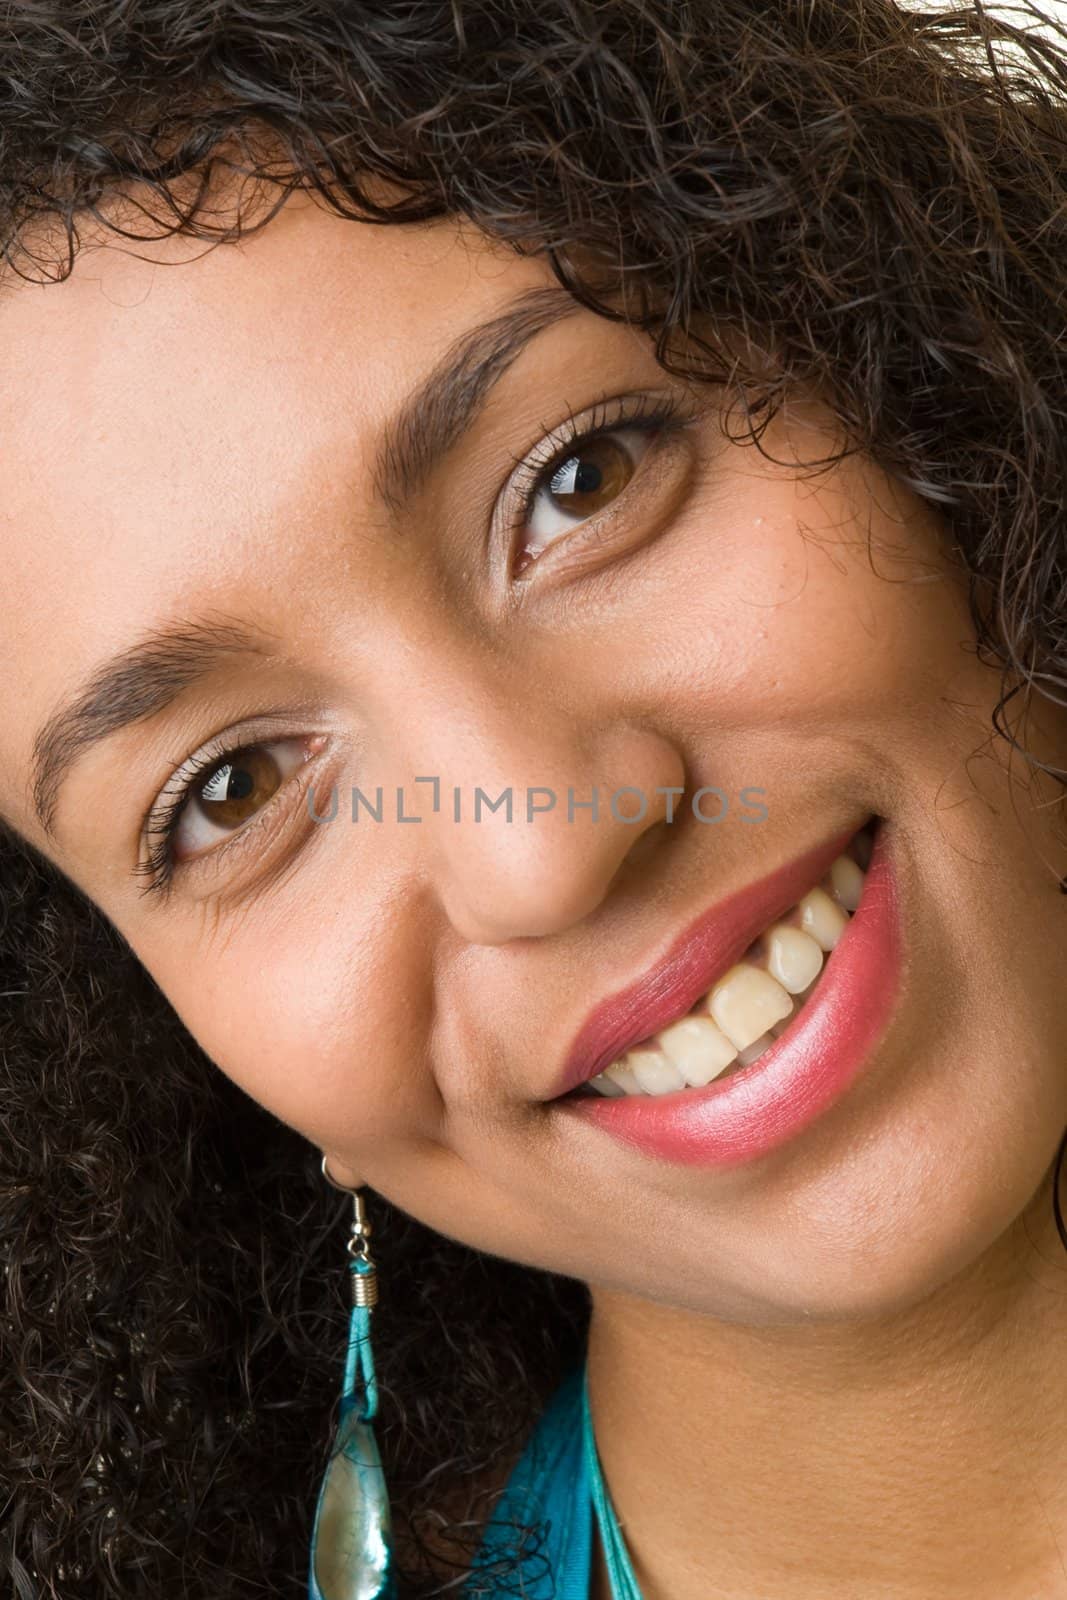 The beautiful smiling black woman close up.